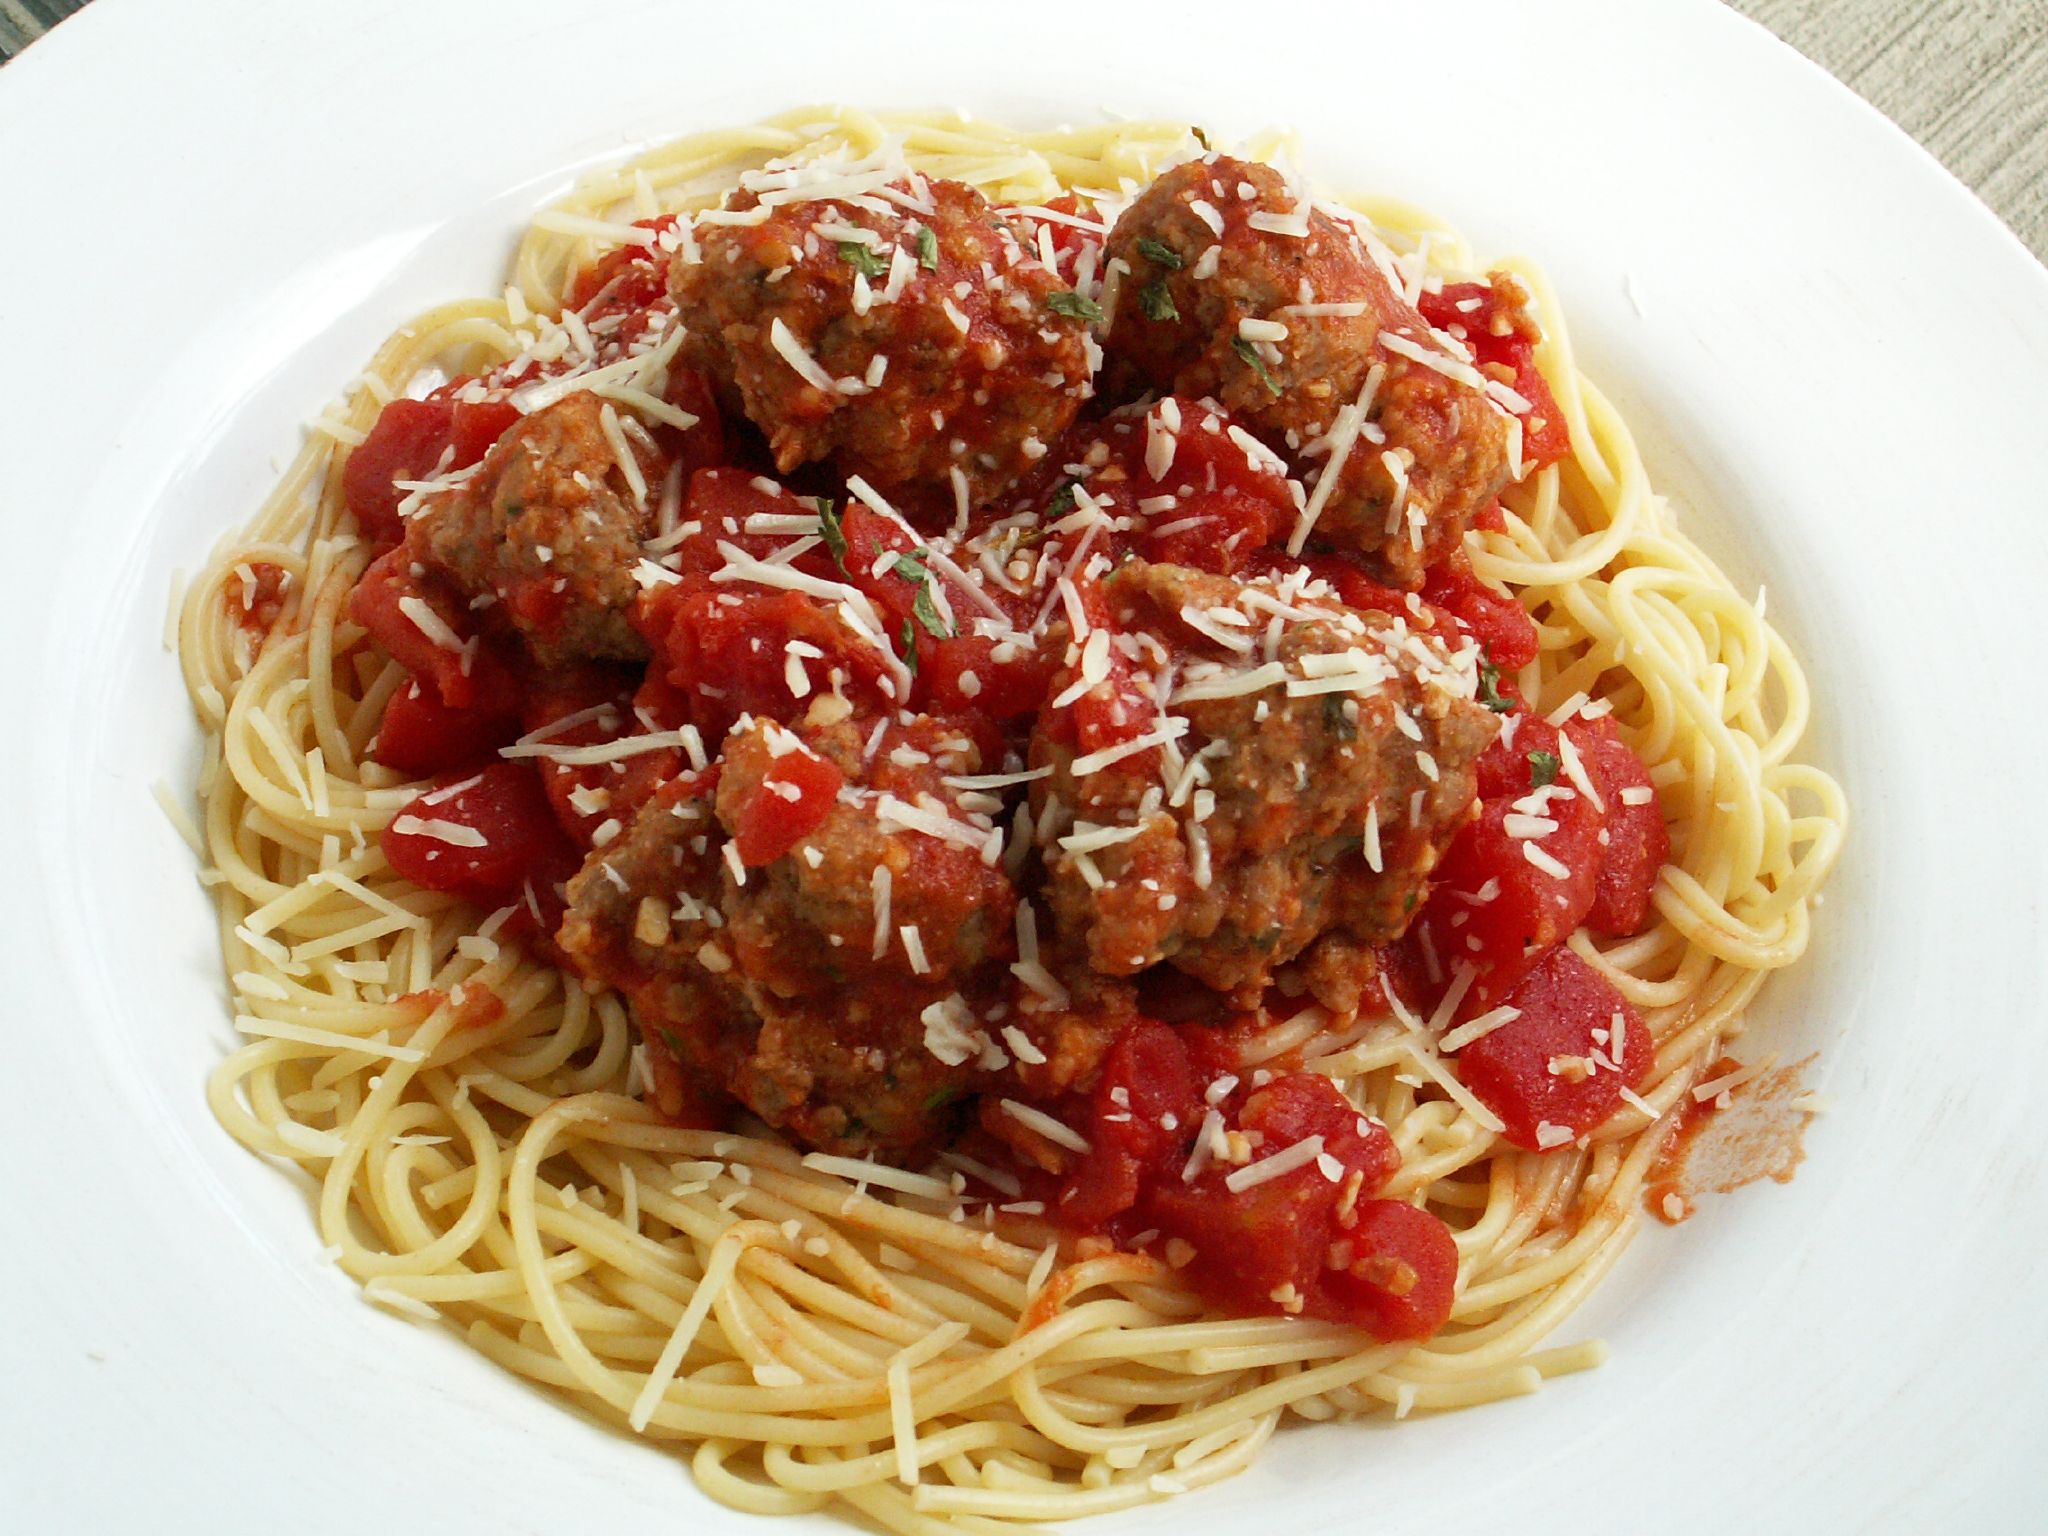 spaghetti with meatballs and marinara sauce in a white bowl